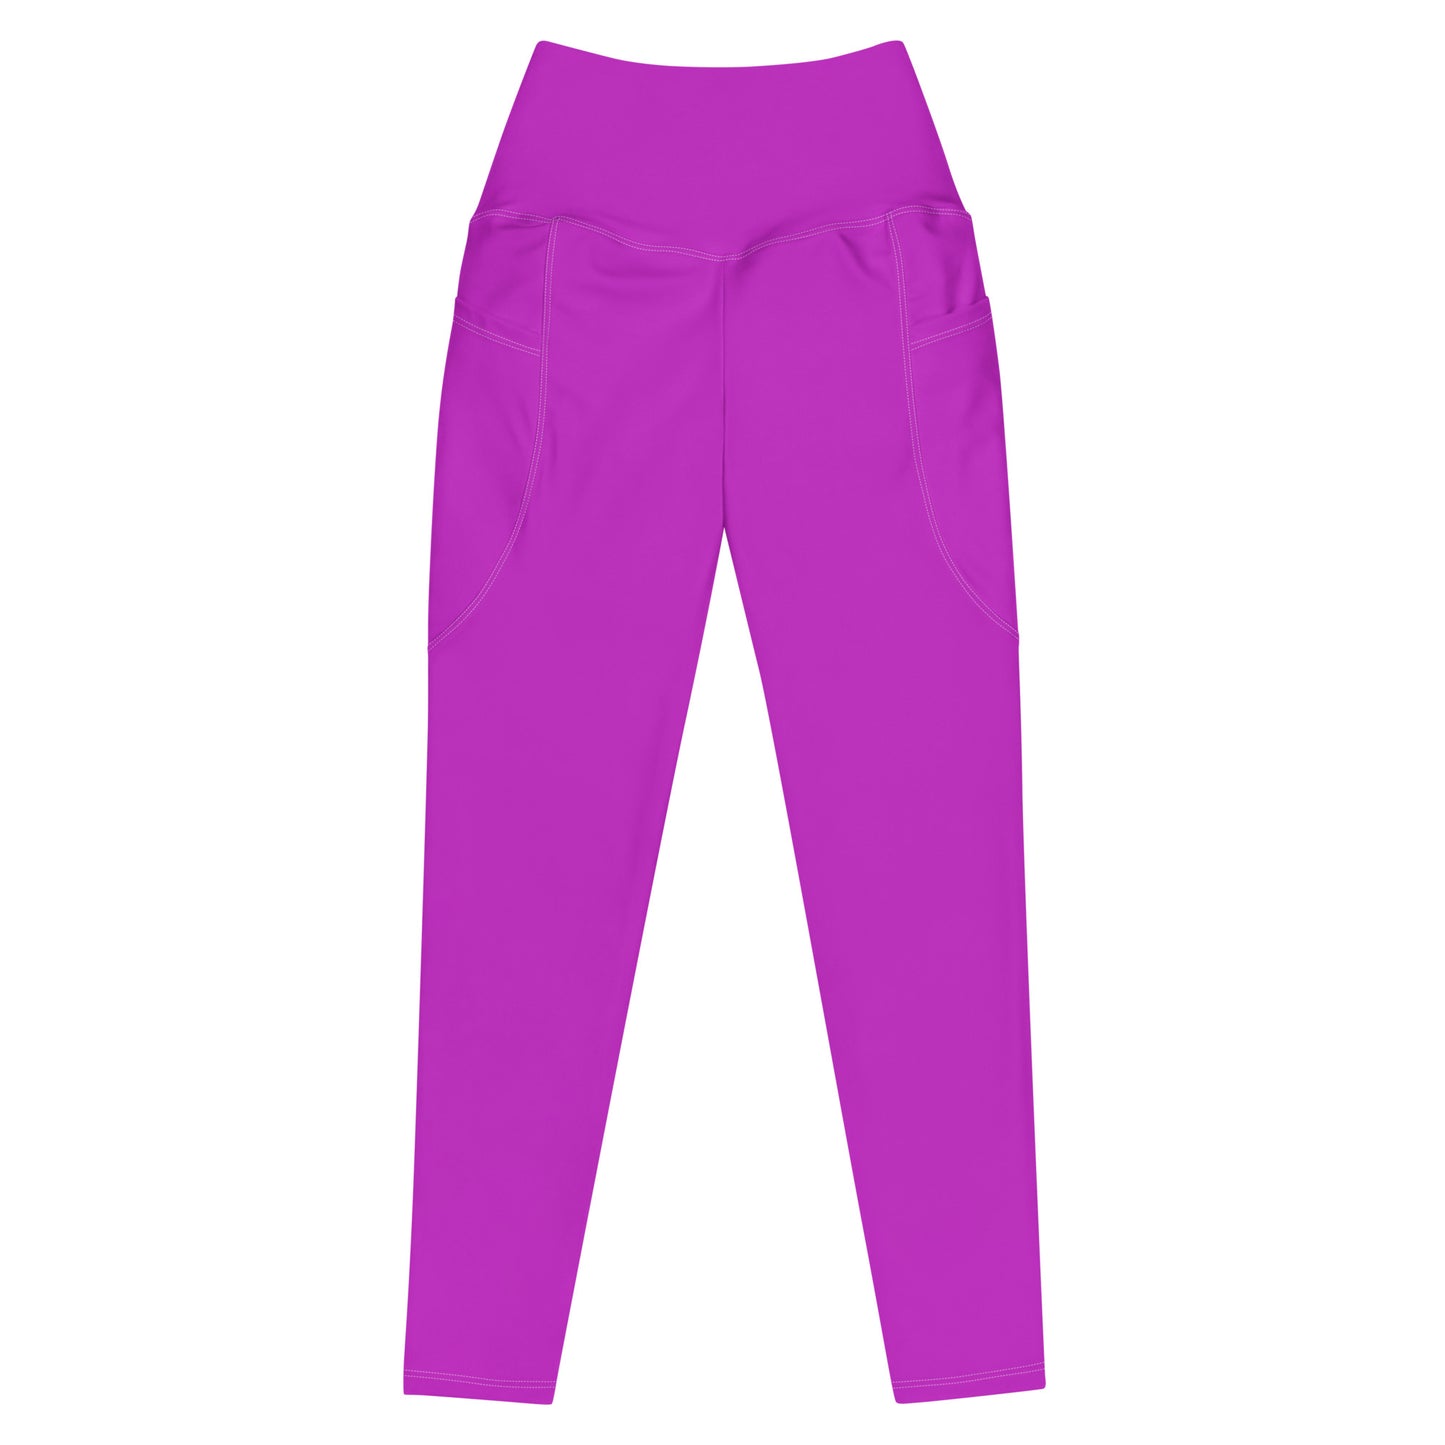 Alpenrose Solid Color High Waist 7/8 Recycled Yoga Leggings / Yoga Pants with Pockets